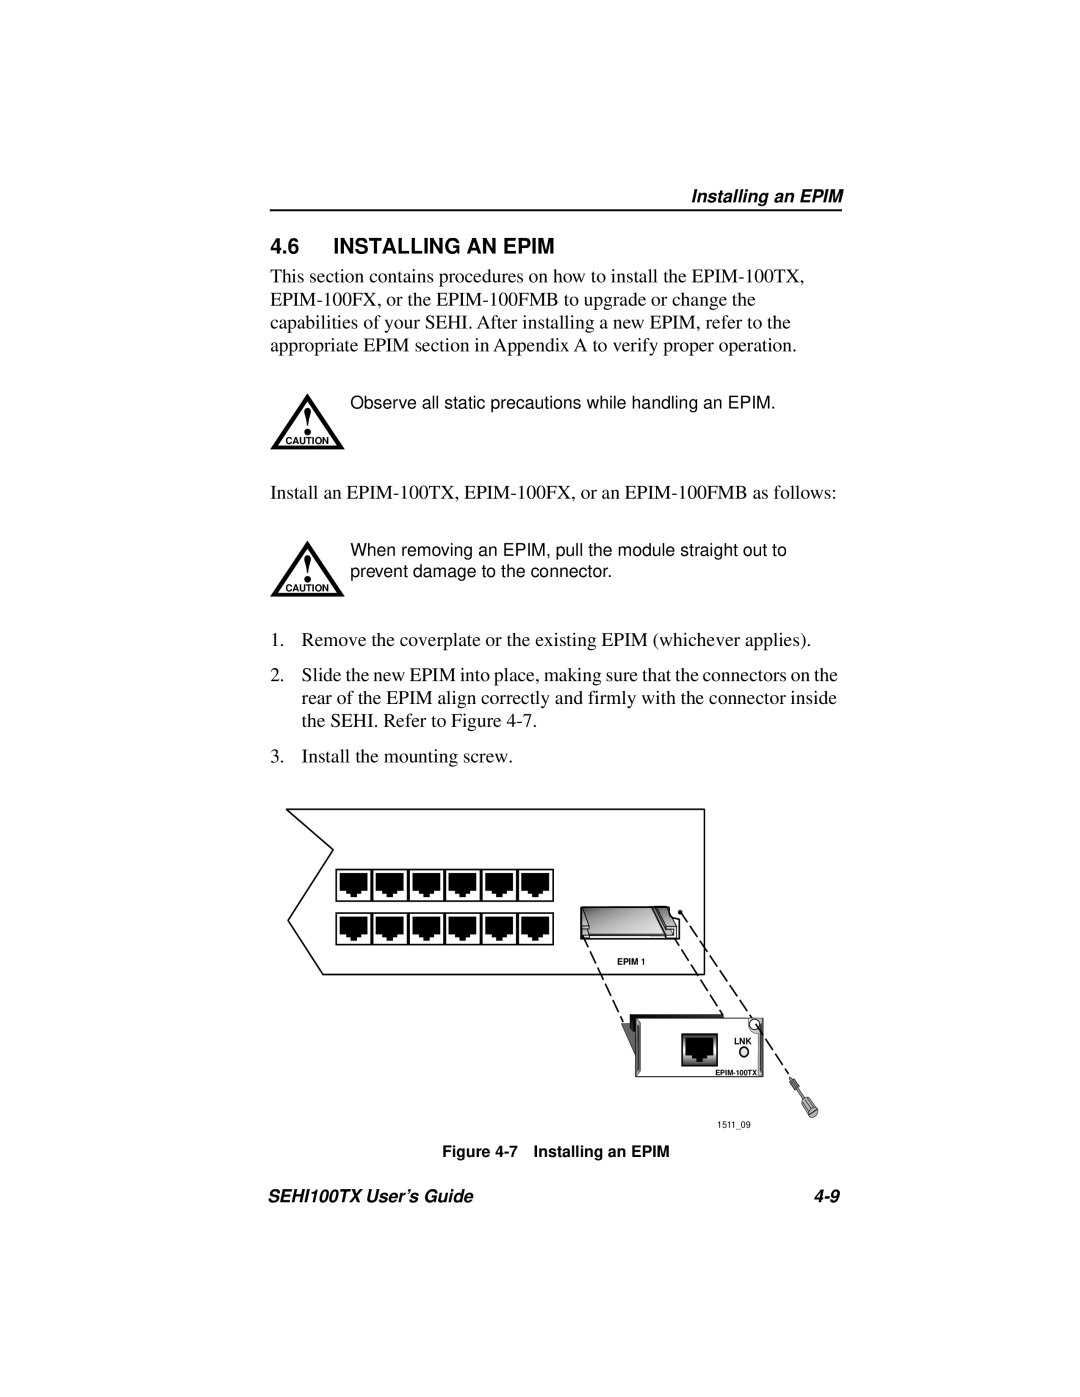 Cabletron Systems SEHI100TX-22 manual Installing An Epim 